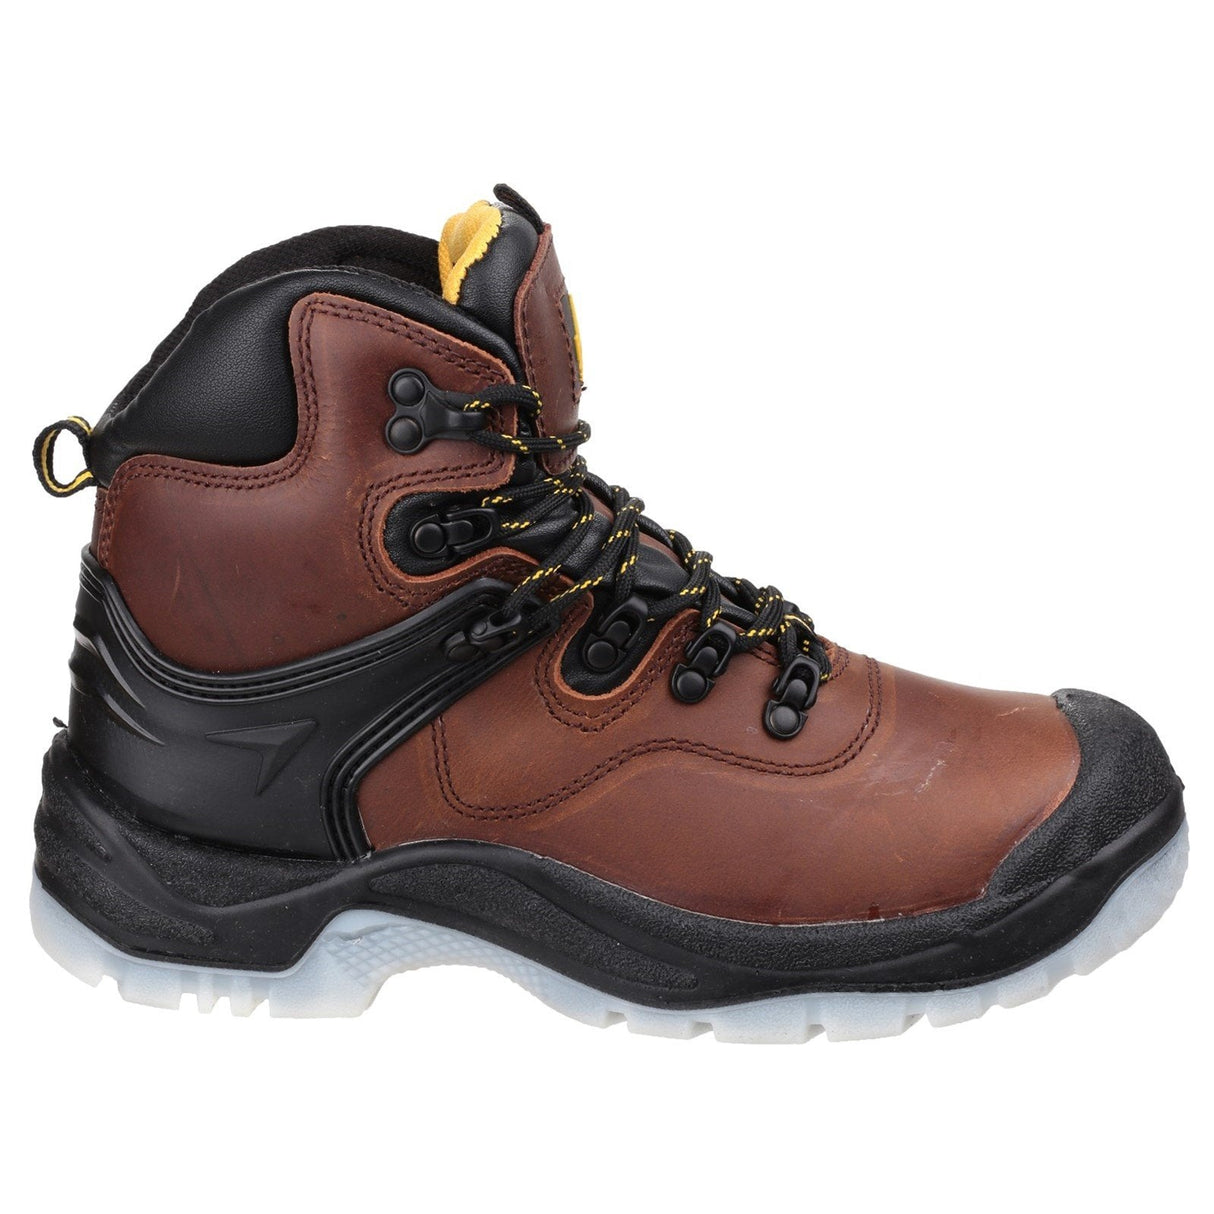 Amblers Safety Shock Absorbing Waterproof Lace Up Safety Boots